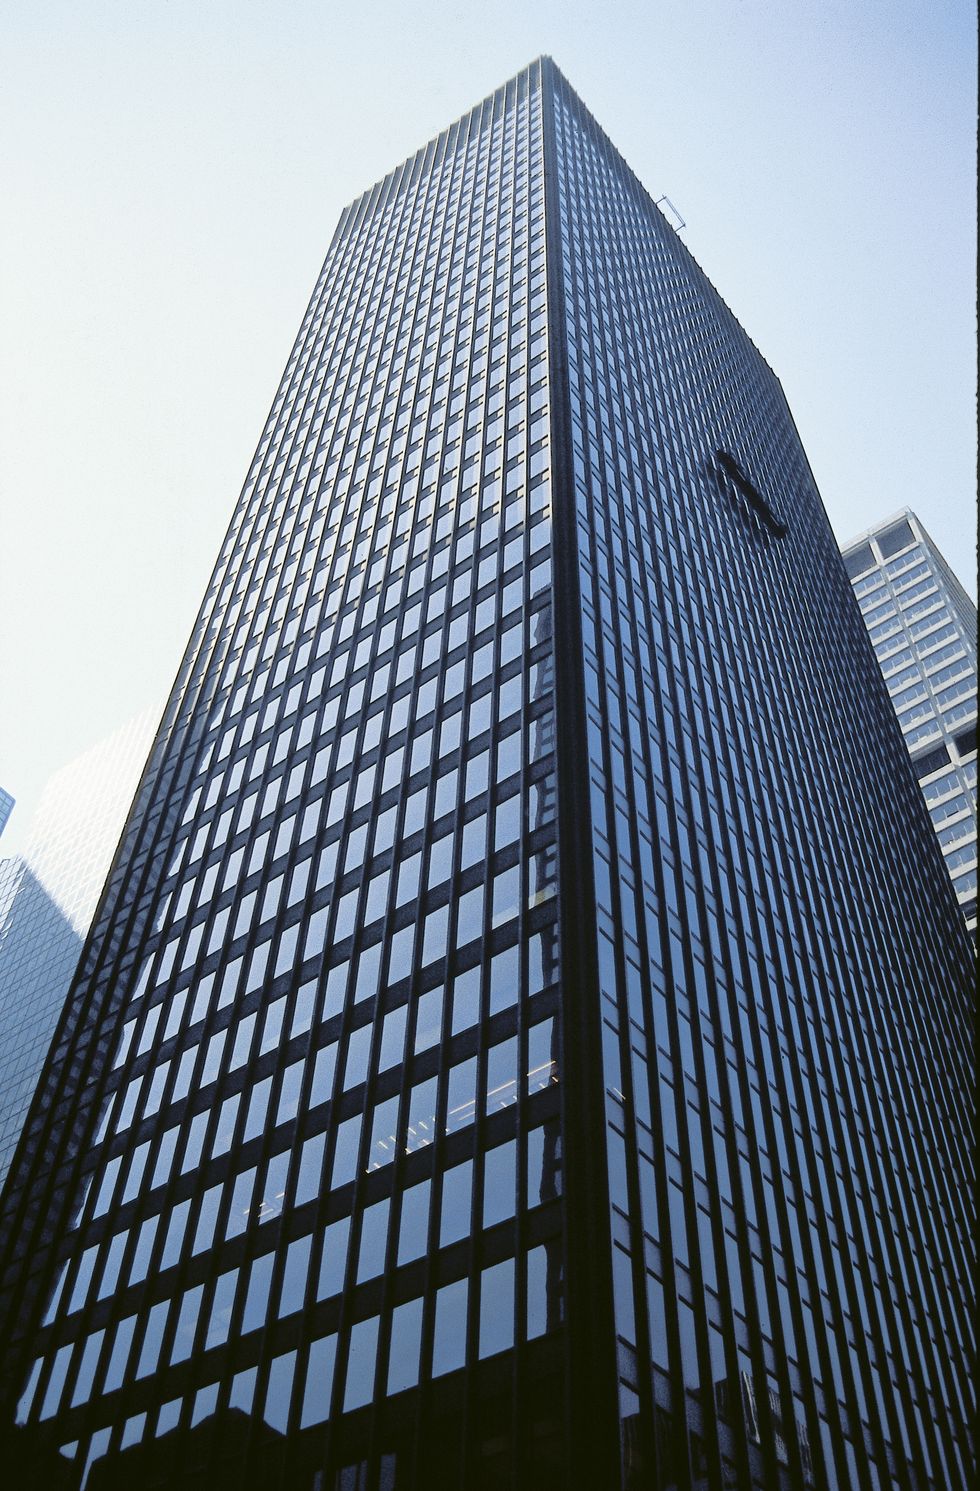 seagrams building in new york city was built in 1958, the architects were ludwig mies van der rohe and philip johnson photo by independent picture serviceuniversal images group via getty images